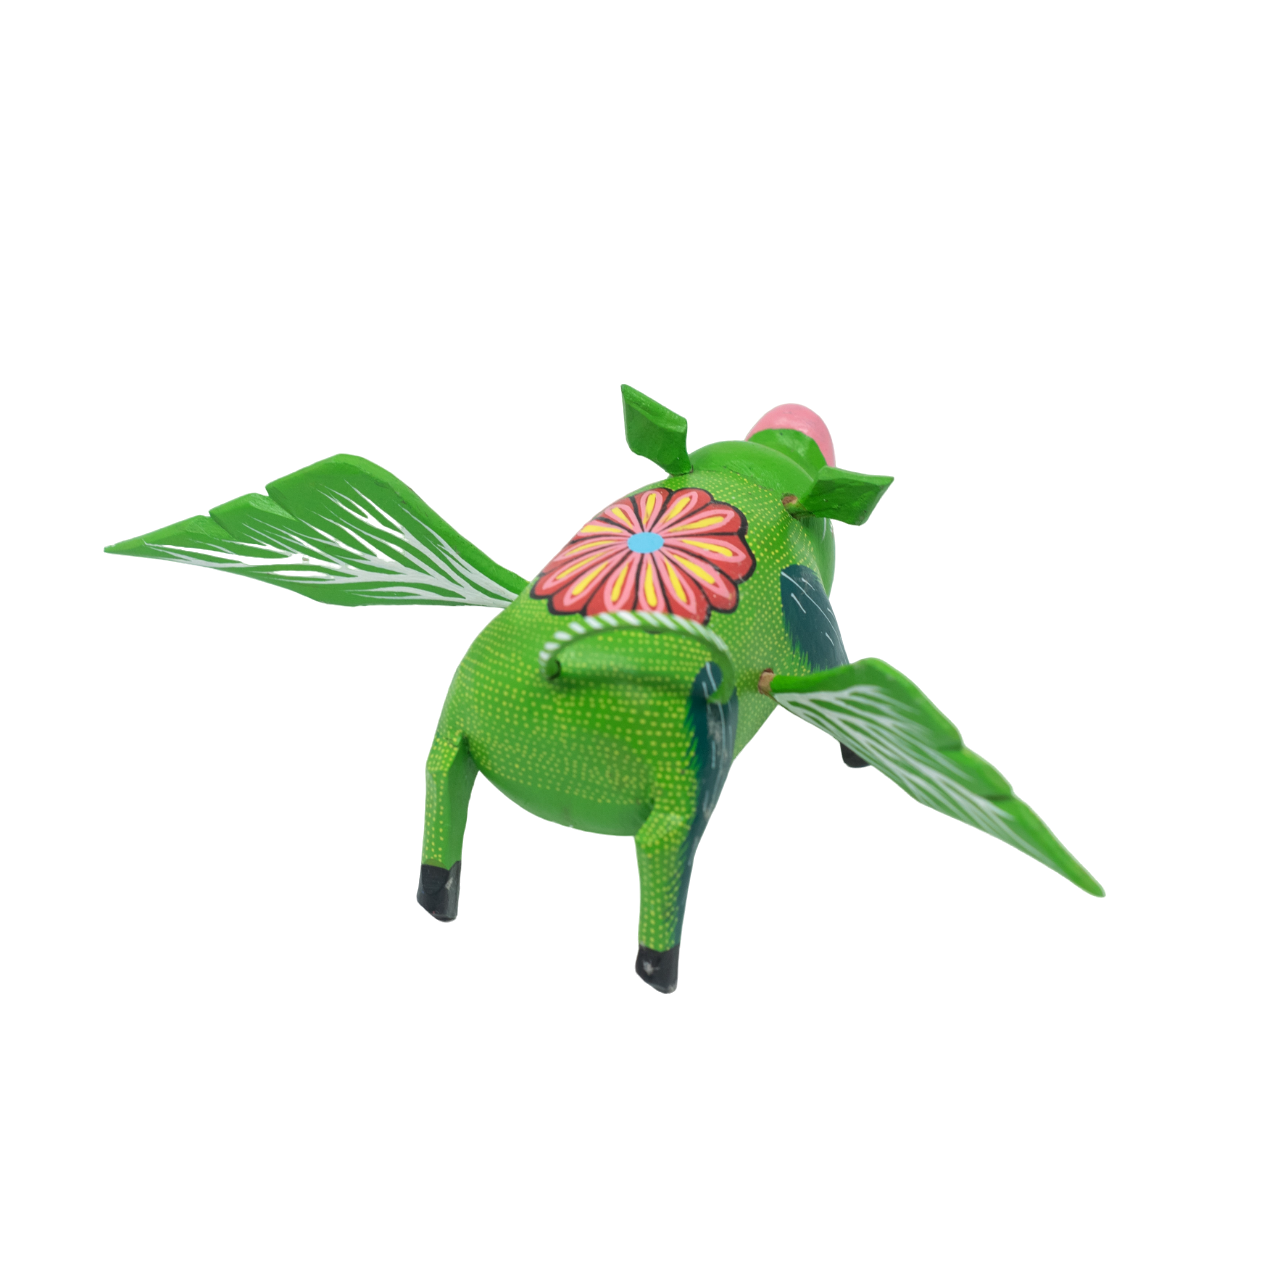 Green Pig, Pig with Wings, Floral Pig, Wooden Floral Pig, Wooden Pig Decor, Wooden Pig Alebrije, Oaxacan Alebrije, Oaxacan Alebrije